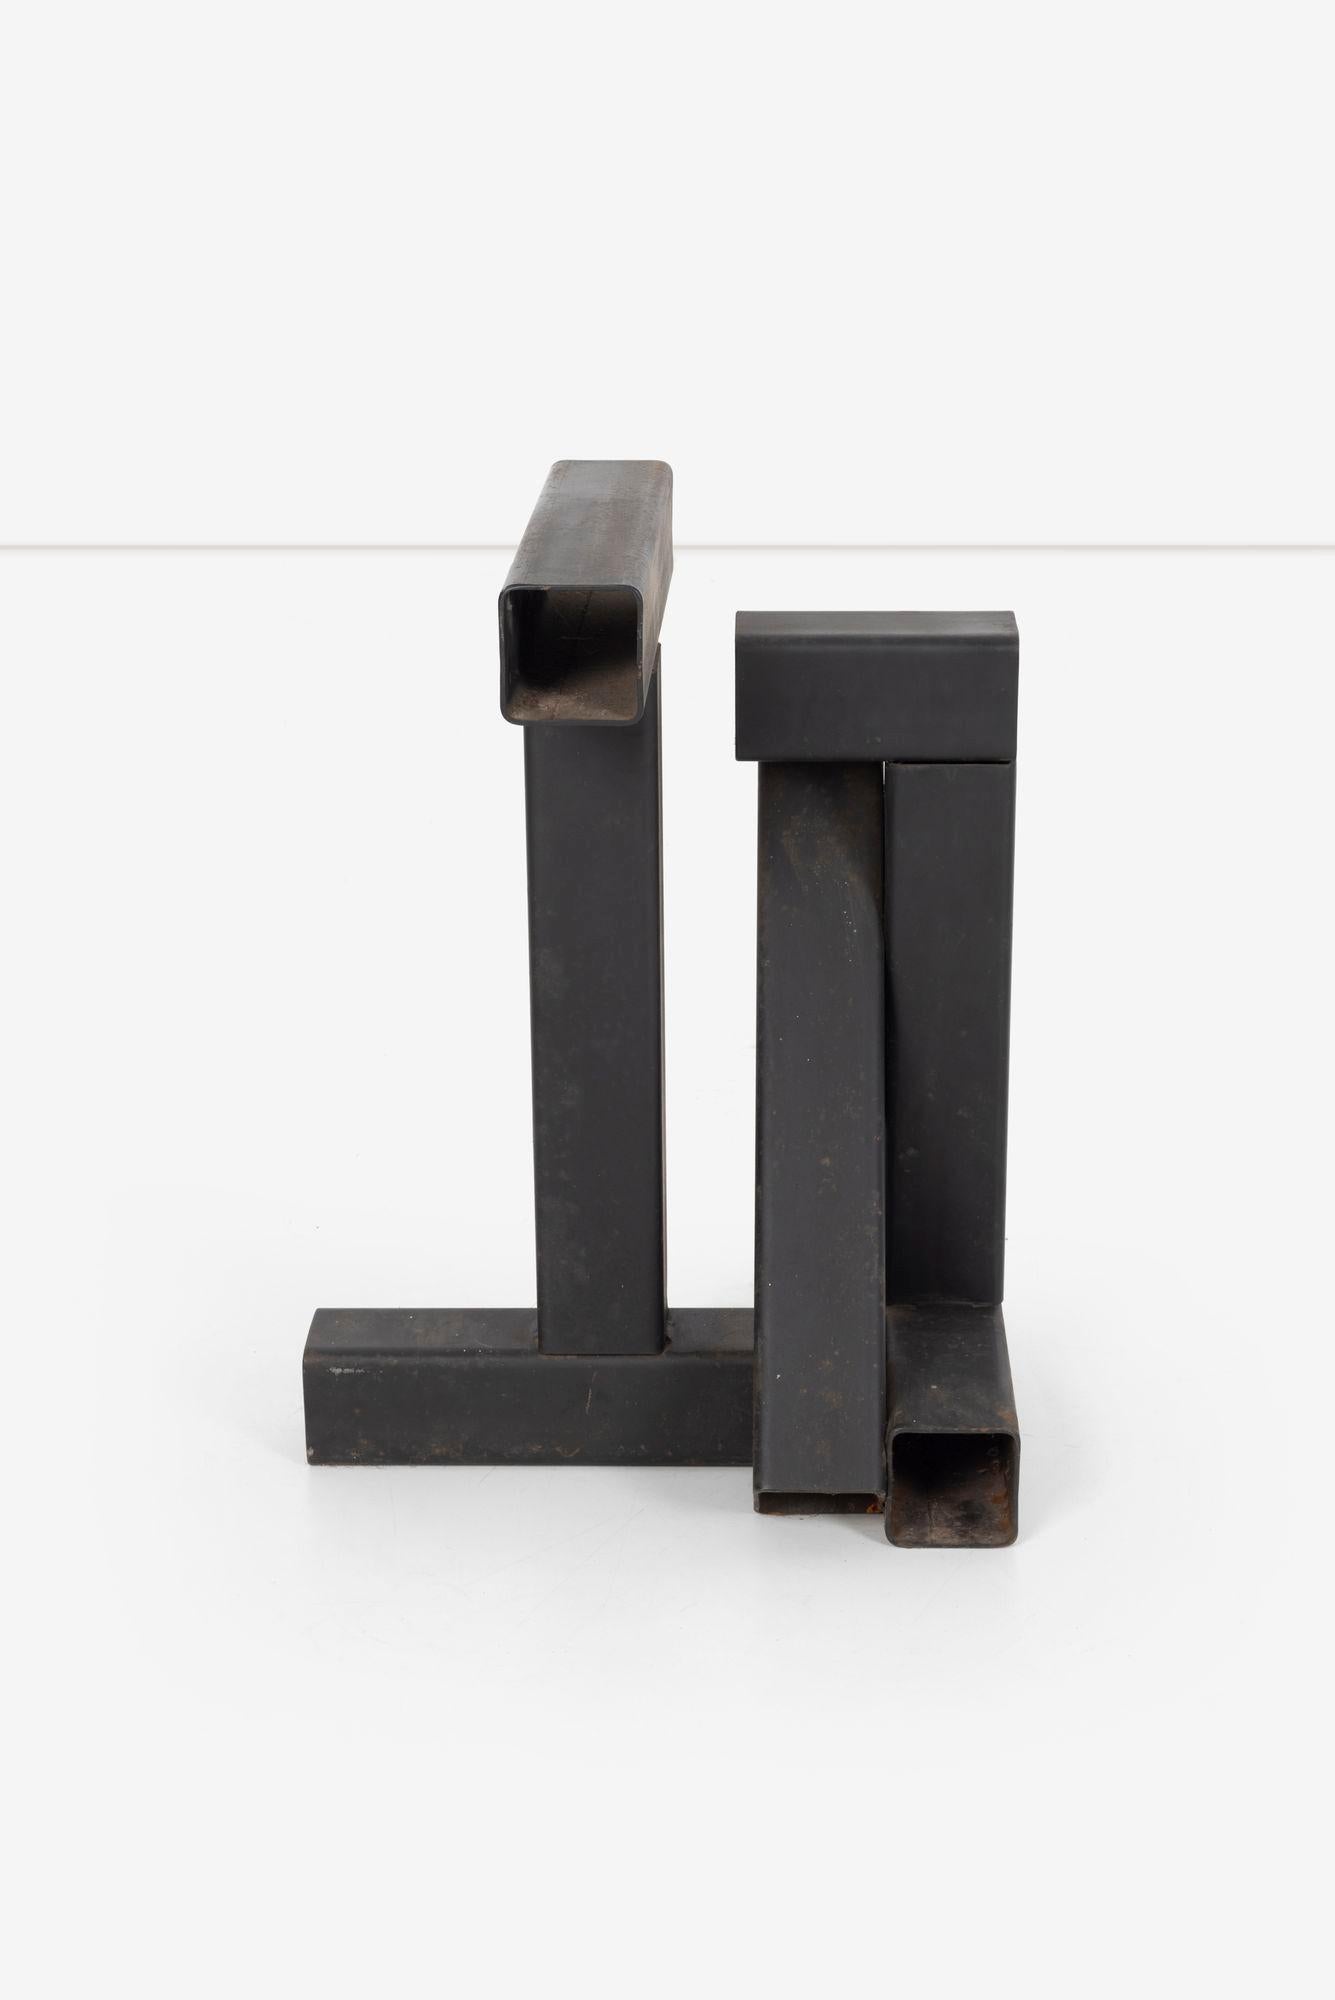 Tony Rosenthal Maquette for Large T-Square Sculpture, 1978 Welded Steel painted.
Last Photograph Tony Rosenthal ’’T-Square’’ (1978) at Grove Isle, Miami, Florida © Estate of Tony Rosenthal / Licensed by VAGA at Artists Rights Society (ARS),